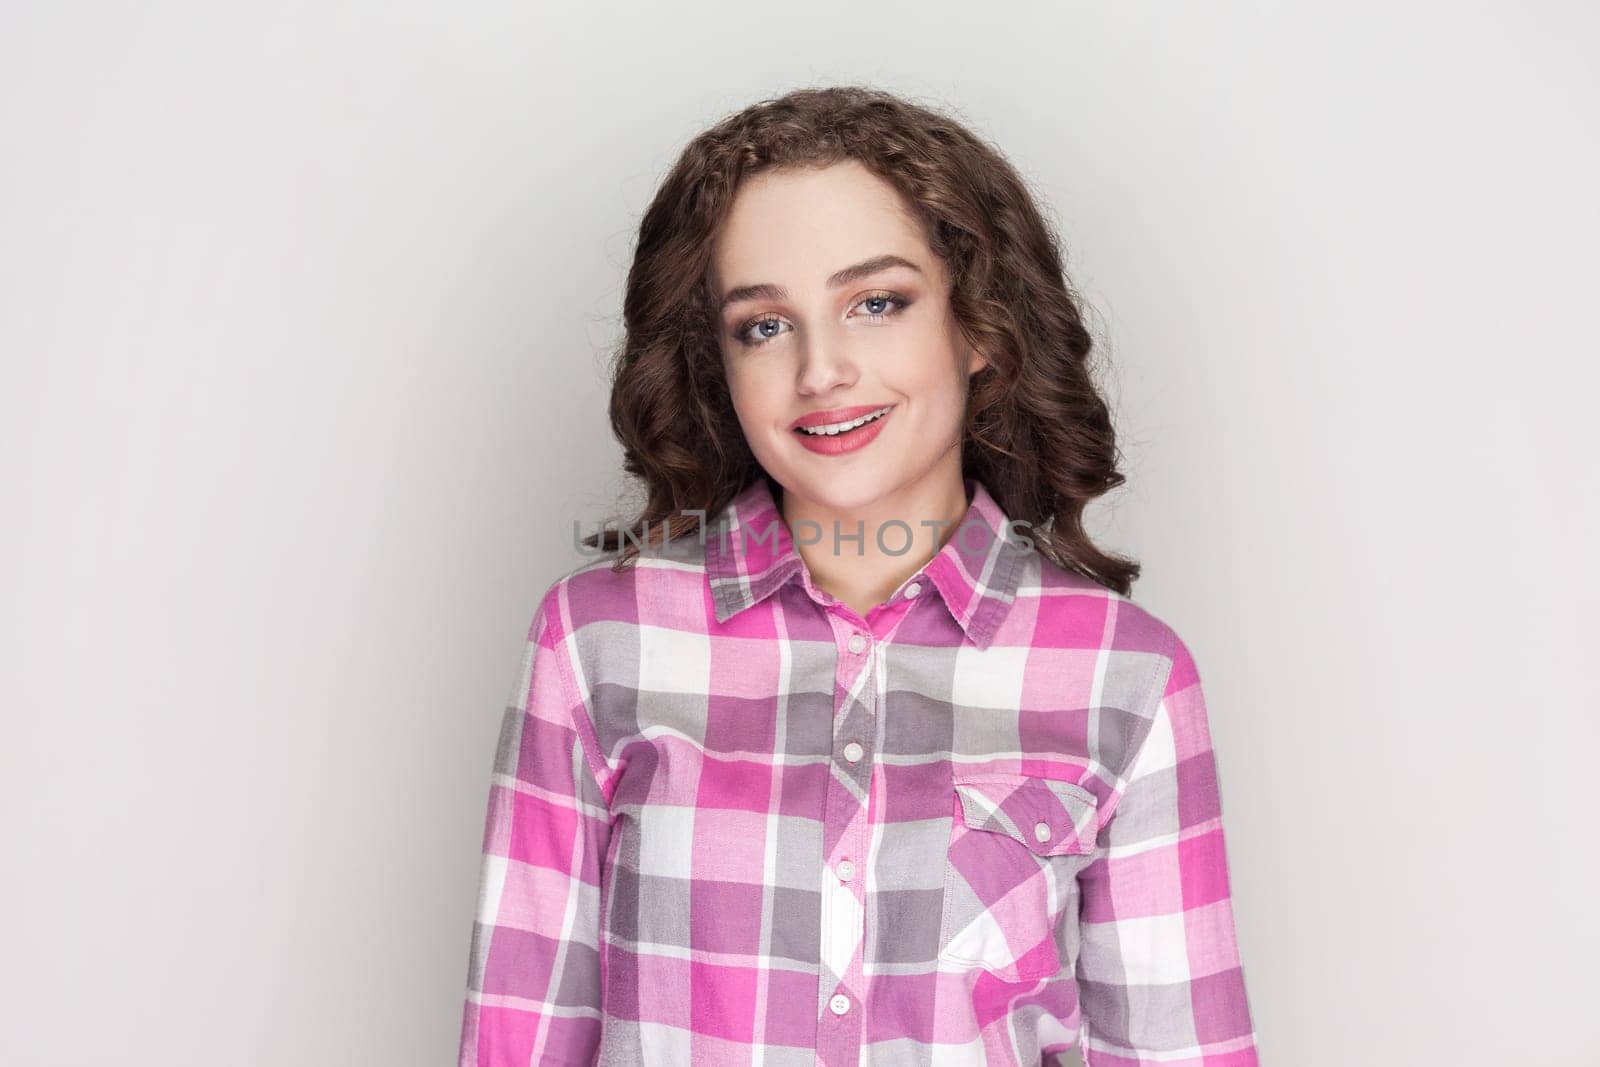 Cheerful woman with curly hair enjoys good day, looks unbothered and happy, gives sincere friendly smile to you, wearing pink checkered shirt. Indoor studio shot isolated on gray background.